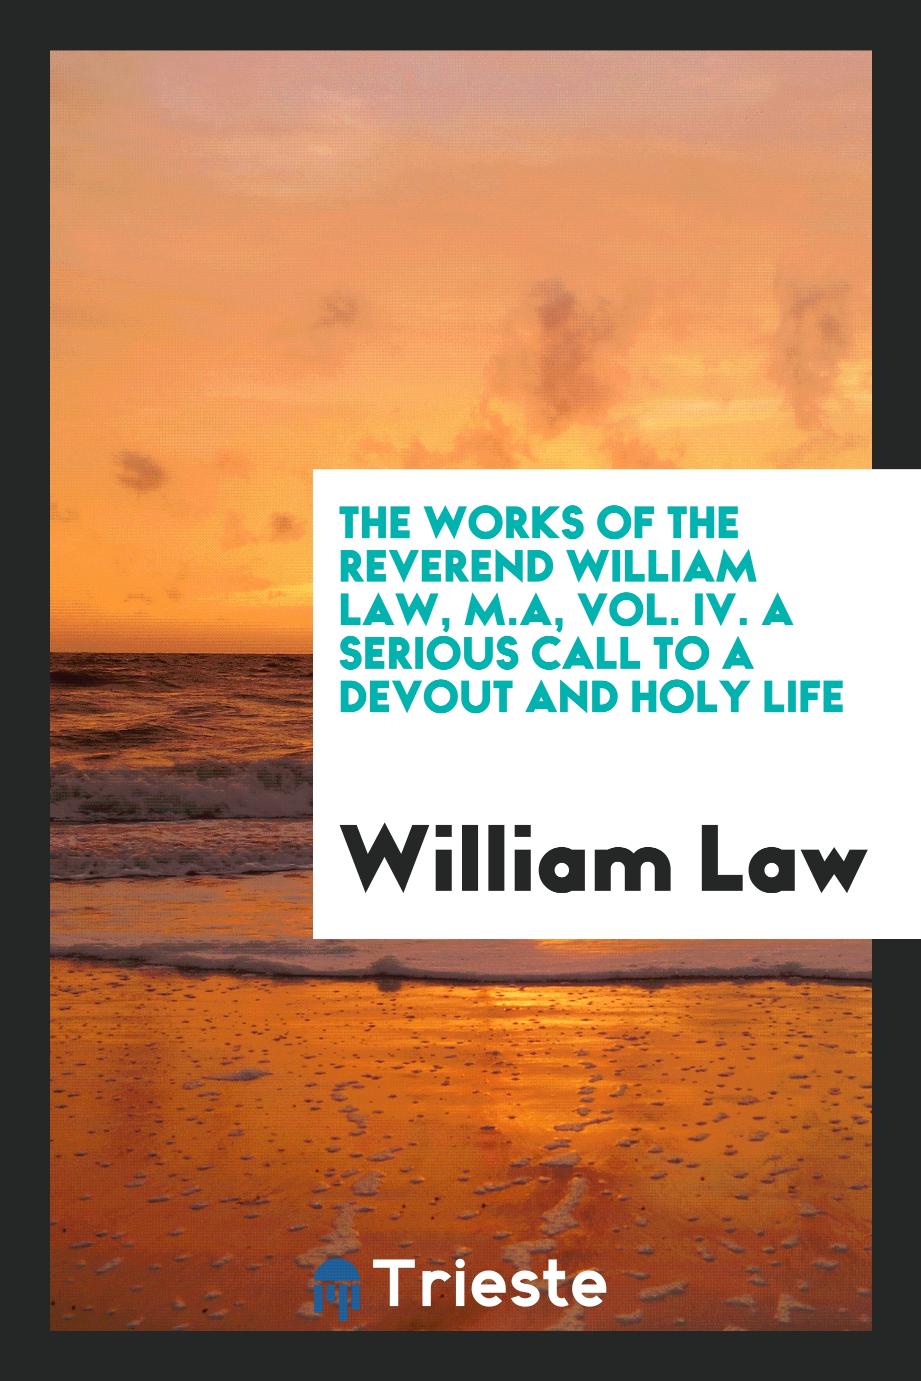 The works of the Reverend William Law, M.A, Vol. IV. A serious call to a devout and holy life